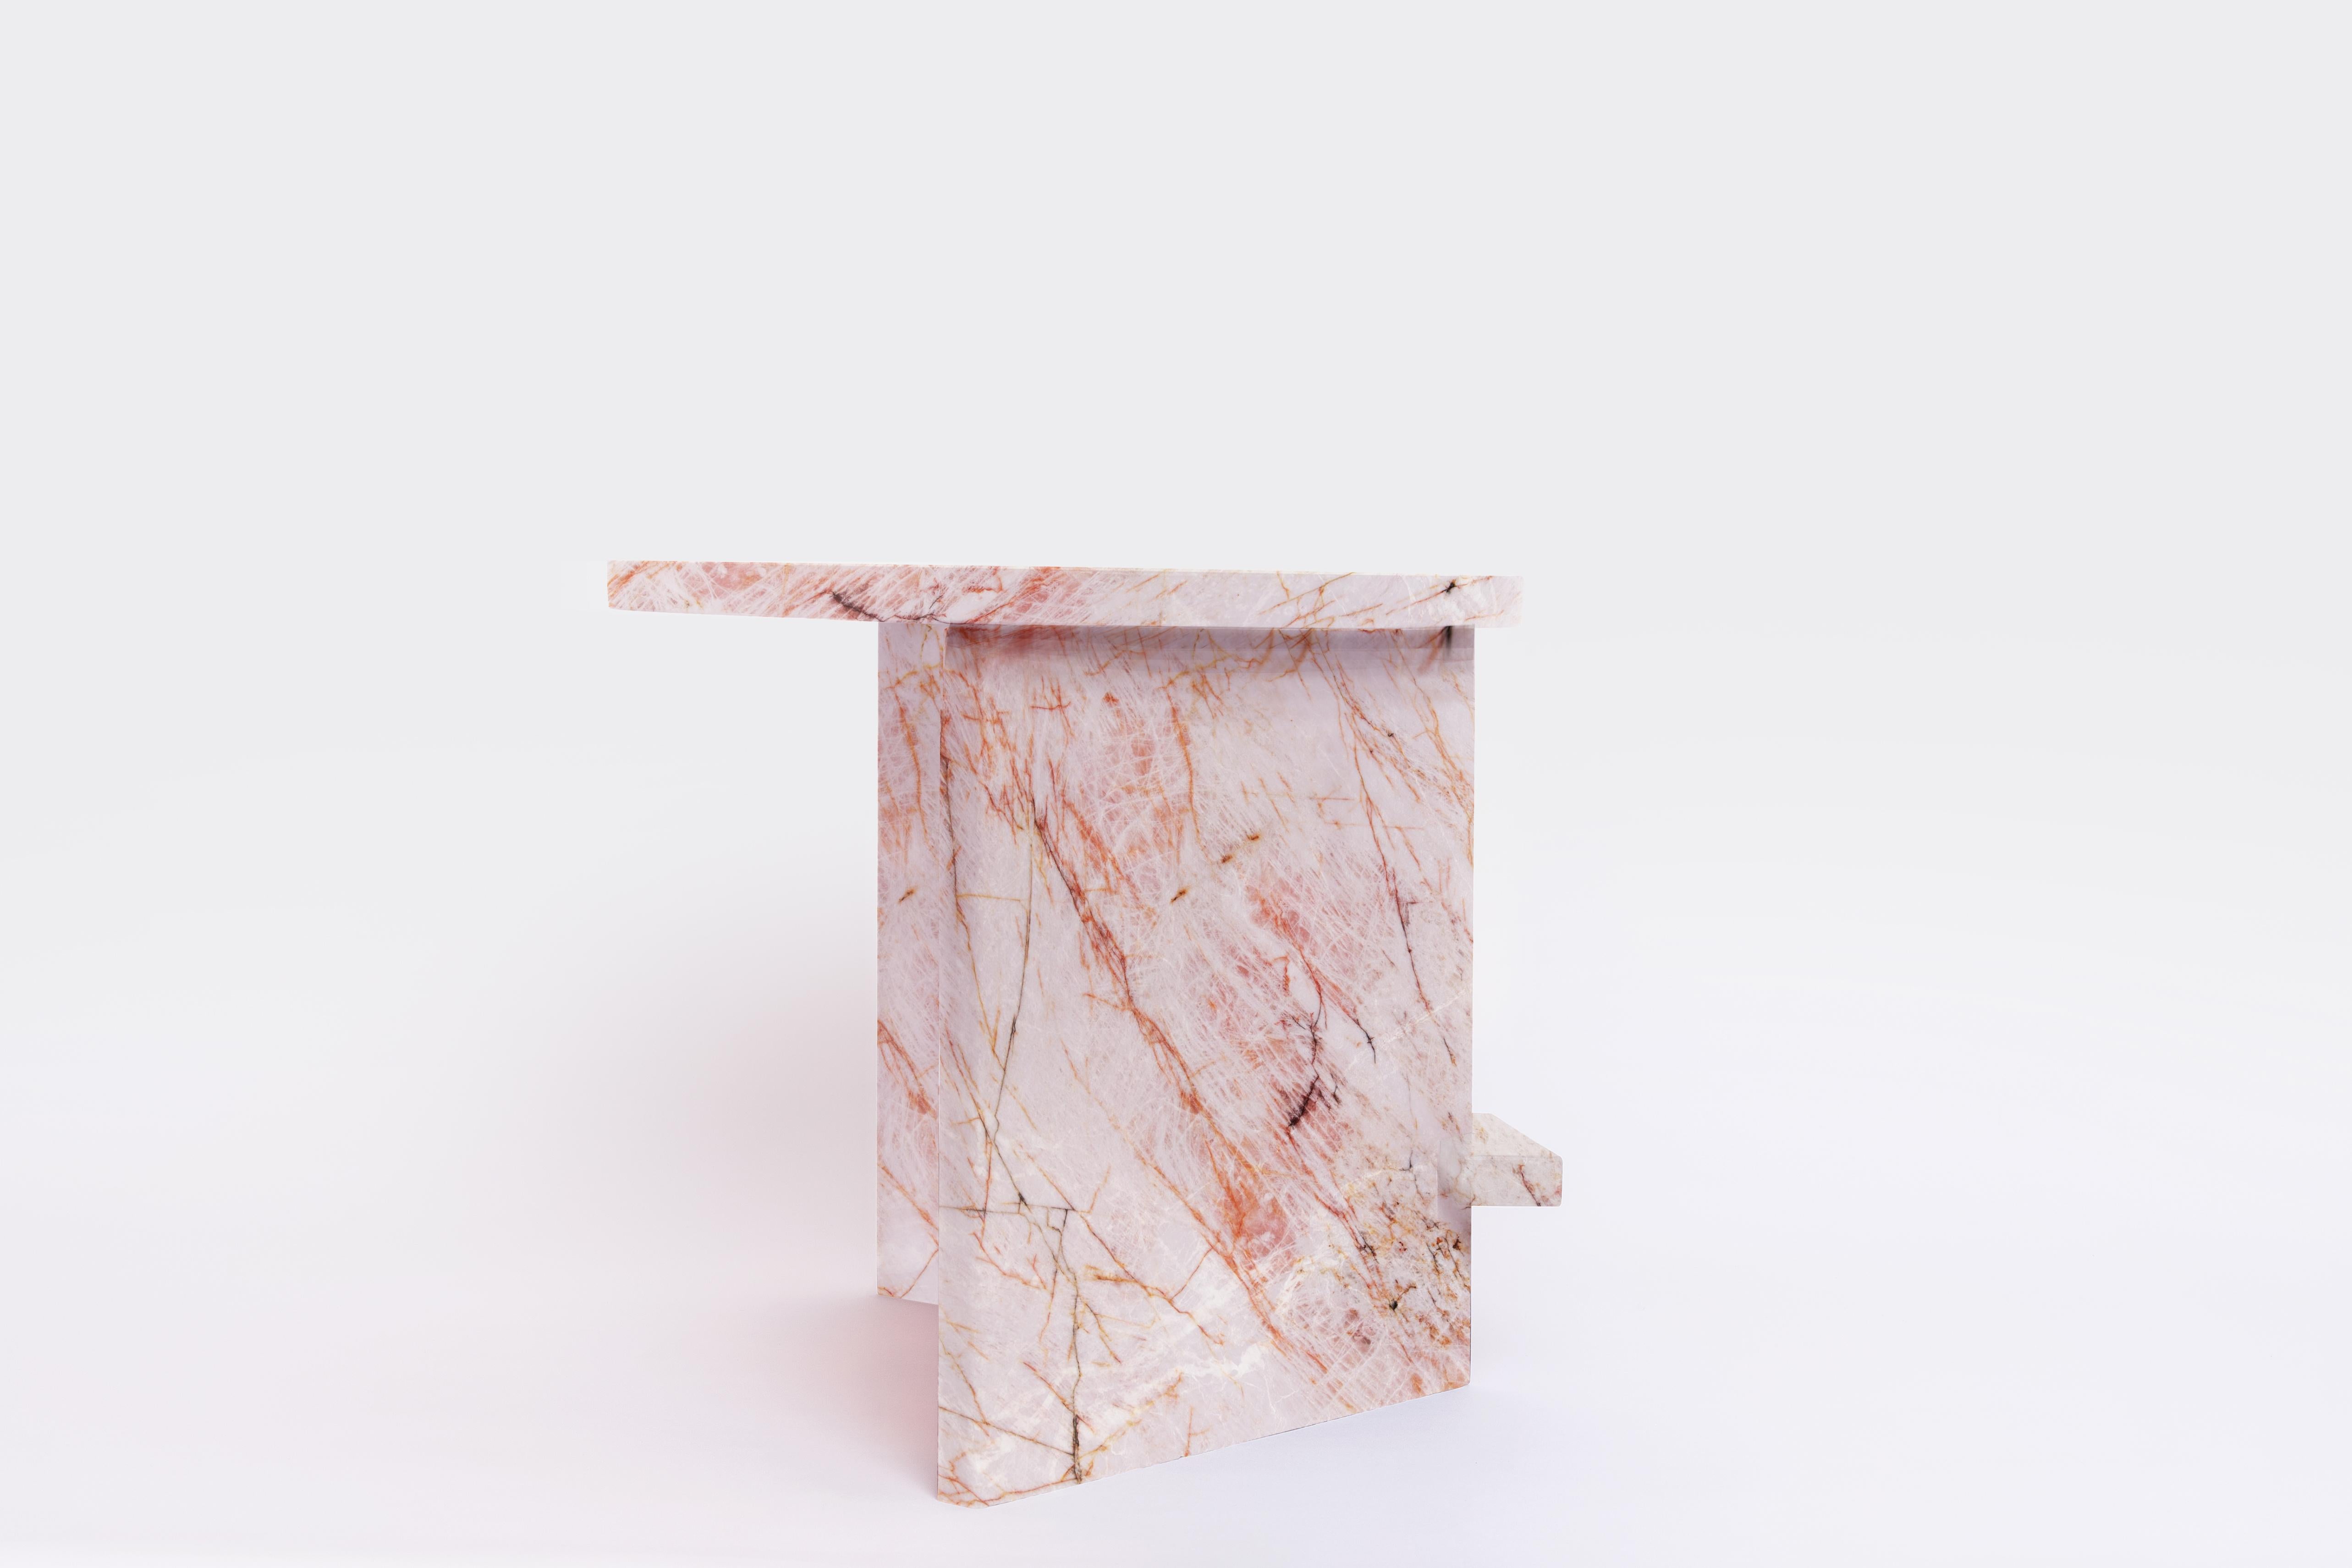 Natural round stone coffee tables or side tables, in resistante brazilian quartzite or granite stone, suited for interior and exterior use - indoor outdoor.


Fusion of elements from Afro-Brazilian popular and religious culture with abstract